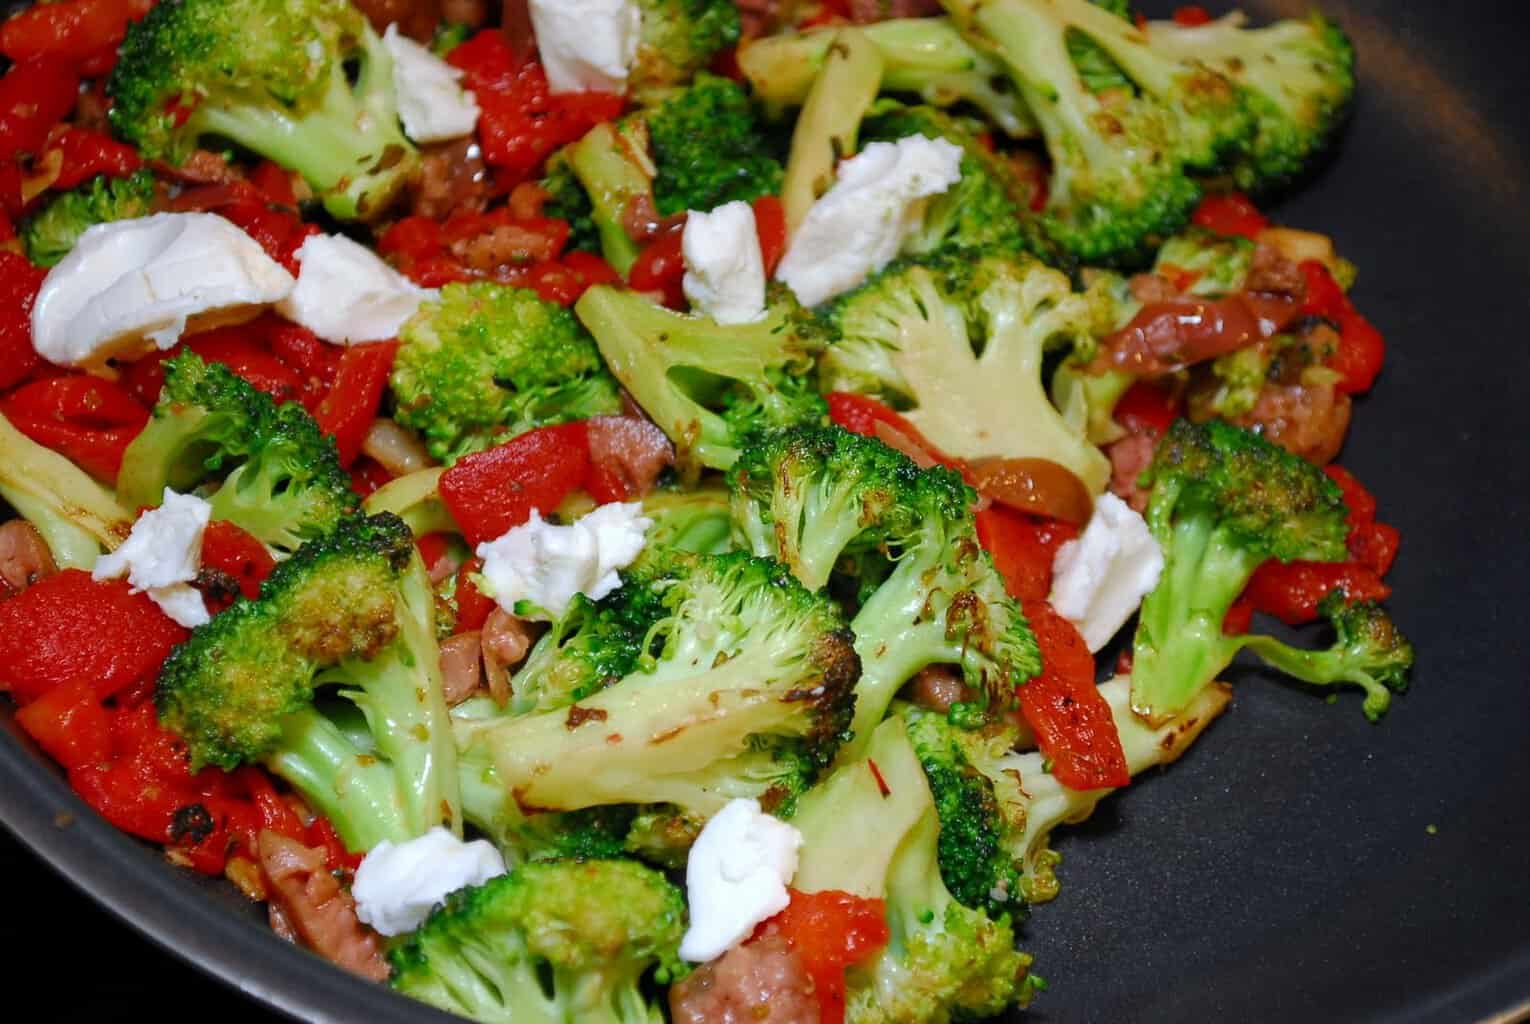 Broccoli and Red Peppers with Goat Cheese